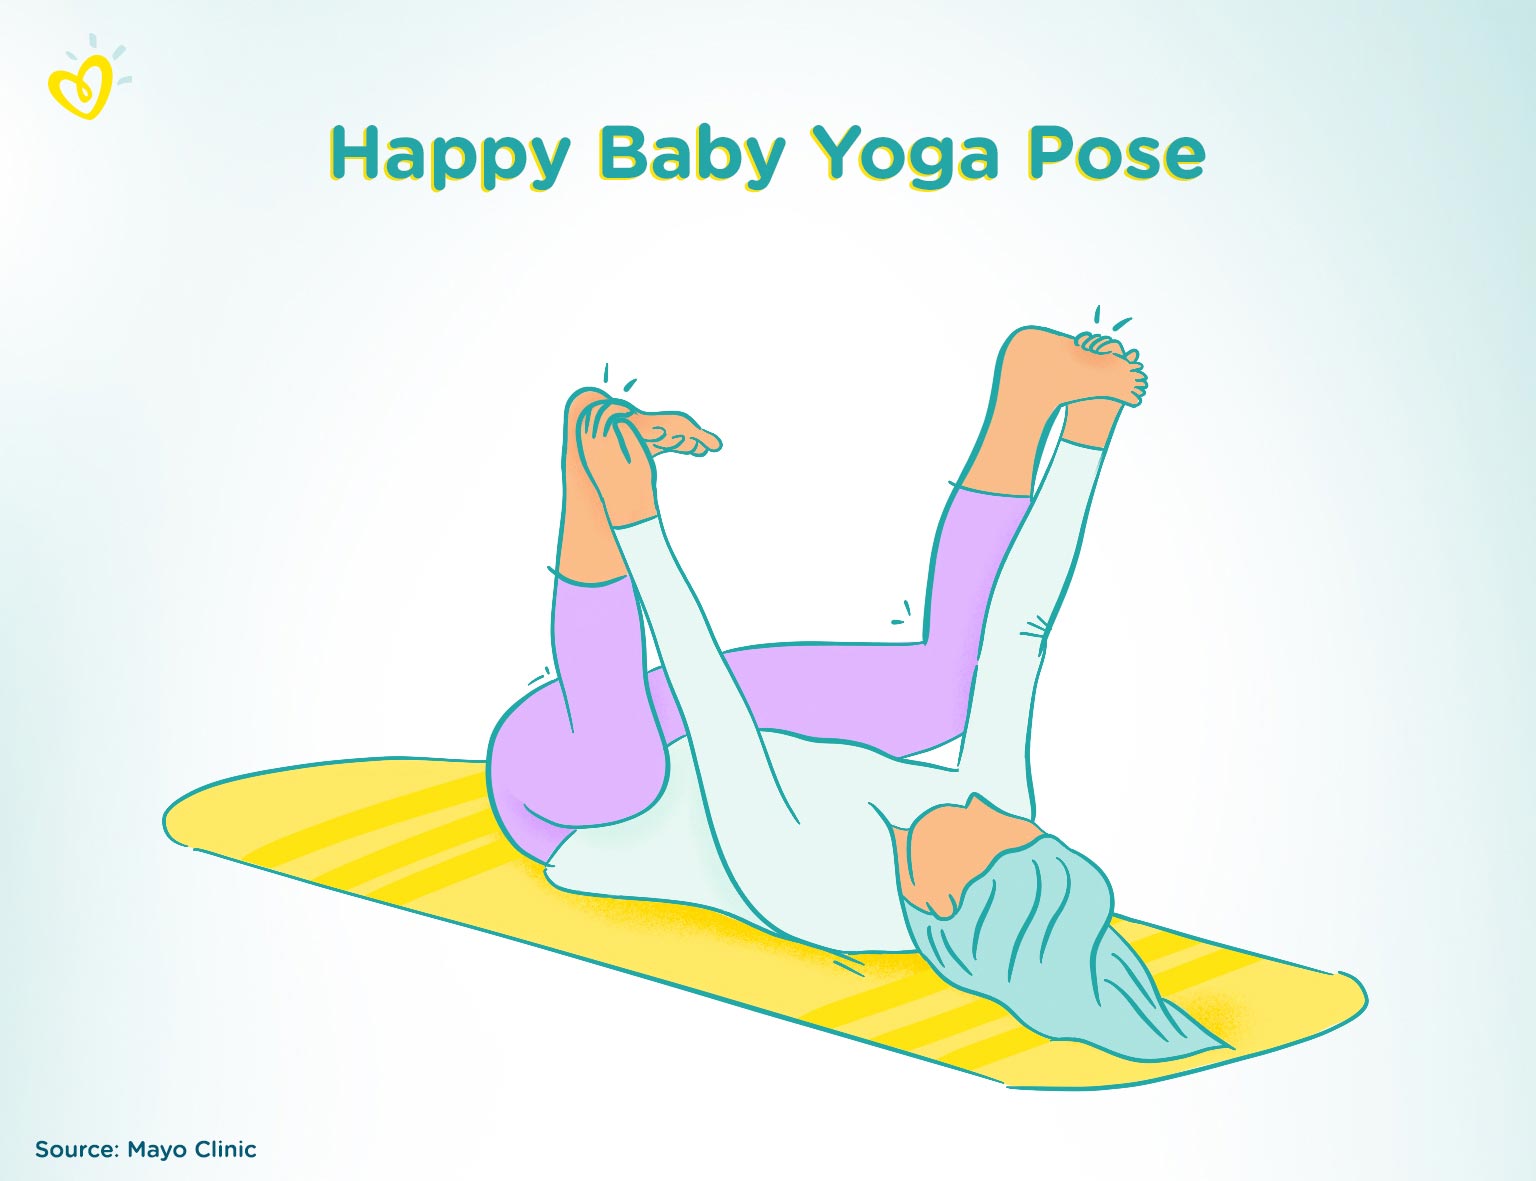 9 Exercises That Can Be Done During the 6 Week Postpartum Wait